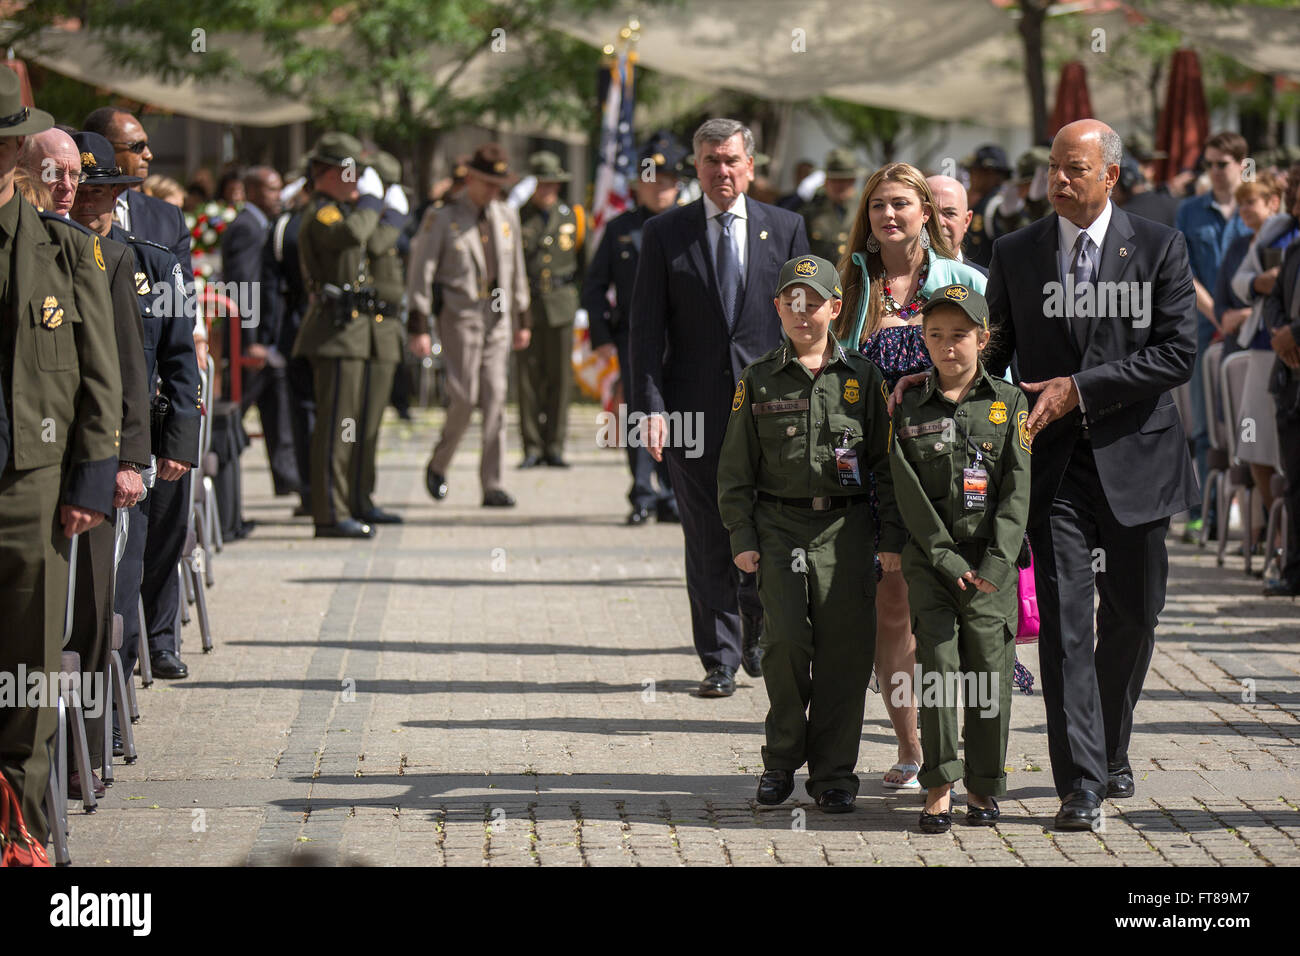 051315: Washington, D.C. - U.S. Customs and Border Protection held their annual Valor Memorial and Wreath Laying Ceremony, on a beautiful day, to honor those that have died in the line of duty this past year. Department of Homeland Security Secretary Jeh Johnson, DHS Deputy Secretary Alejandro Mayorkas, U.S. Customs and Border Protection Commissioner R. Gil Kerliowske, and CBP Deputy Commissioner Kevin McAleenan were all in attendance.   Photographer: Josh Denmark Stock Photo